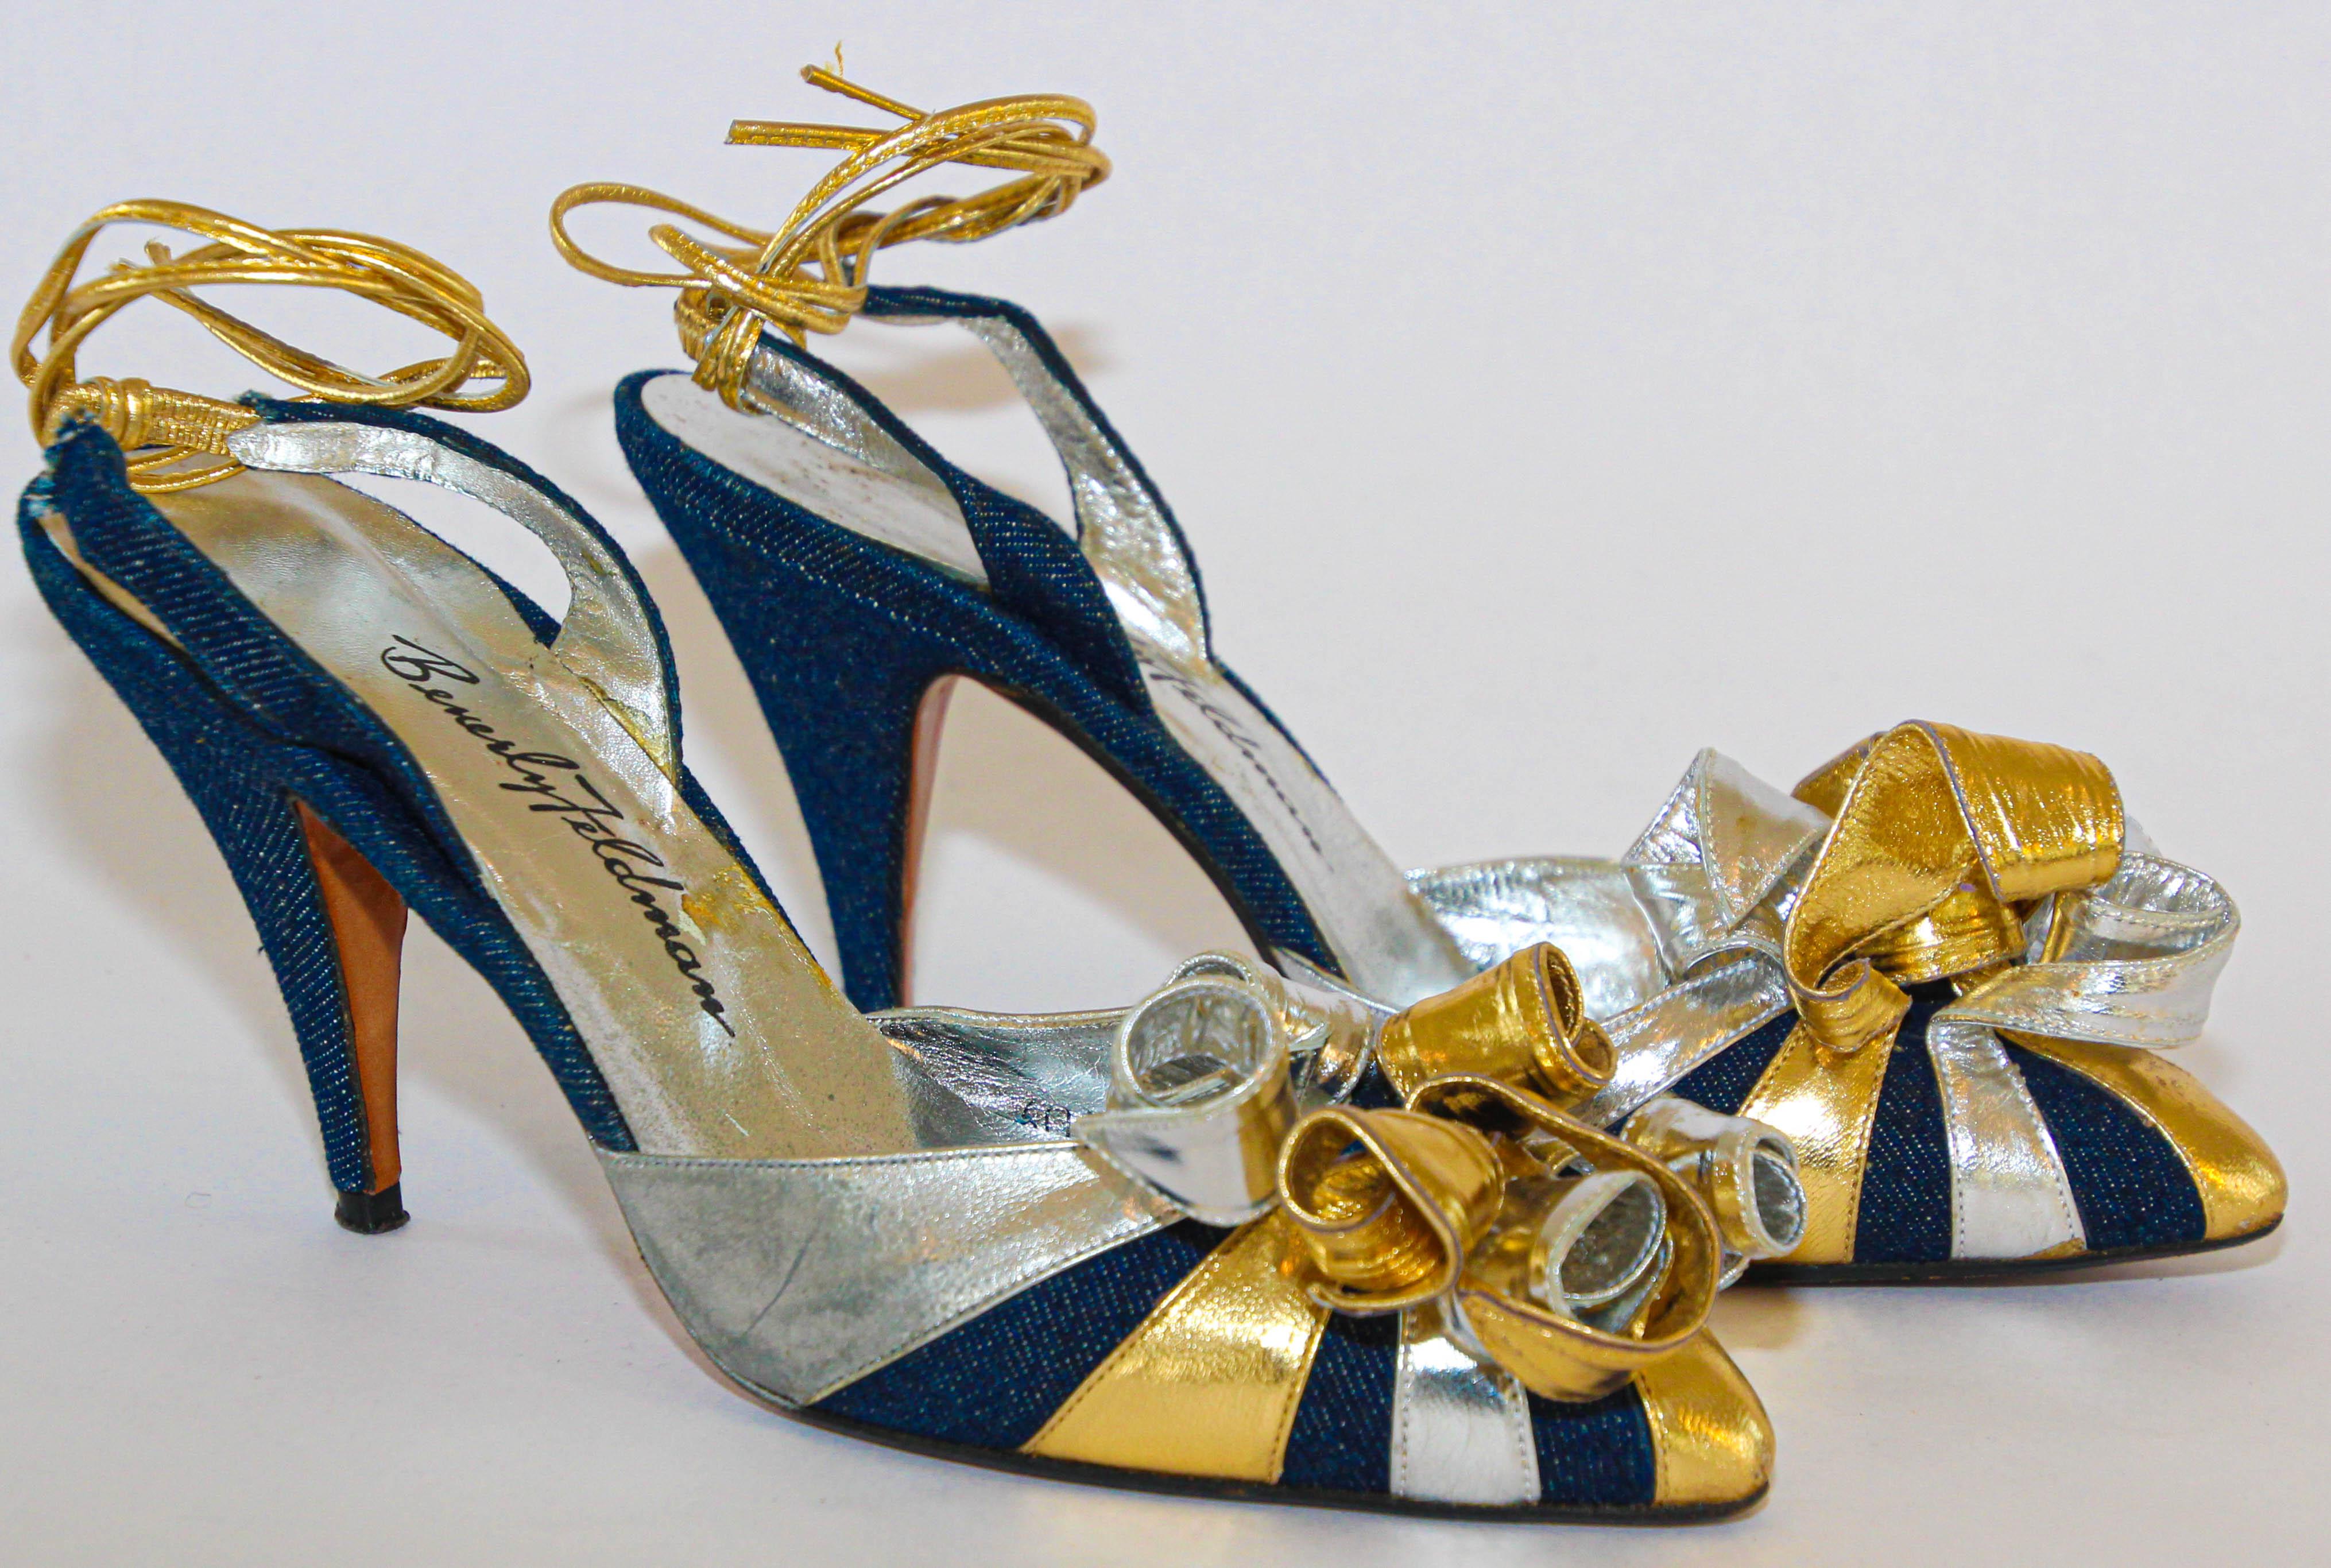 Vintage 1980s Beverly Feldman Metallic Leather Slingback Ankle-Tie with Leather Spirals in blue denim and silver and gold metallic.
Fabulous 1980s Beverly Feldman gold and silver metallic leather statement shoes.
Beverly Feldman metallic foil